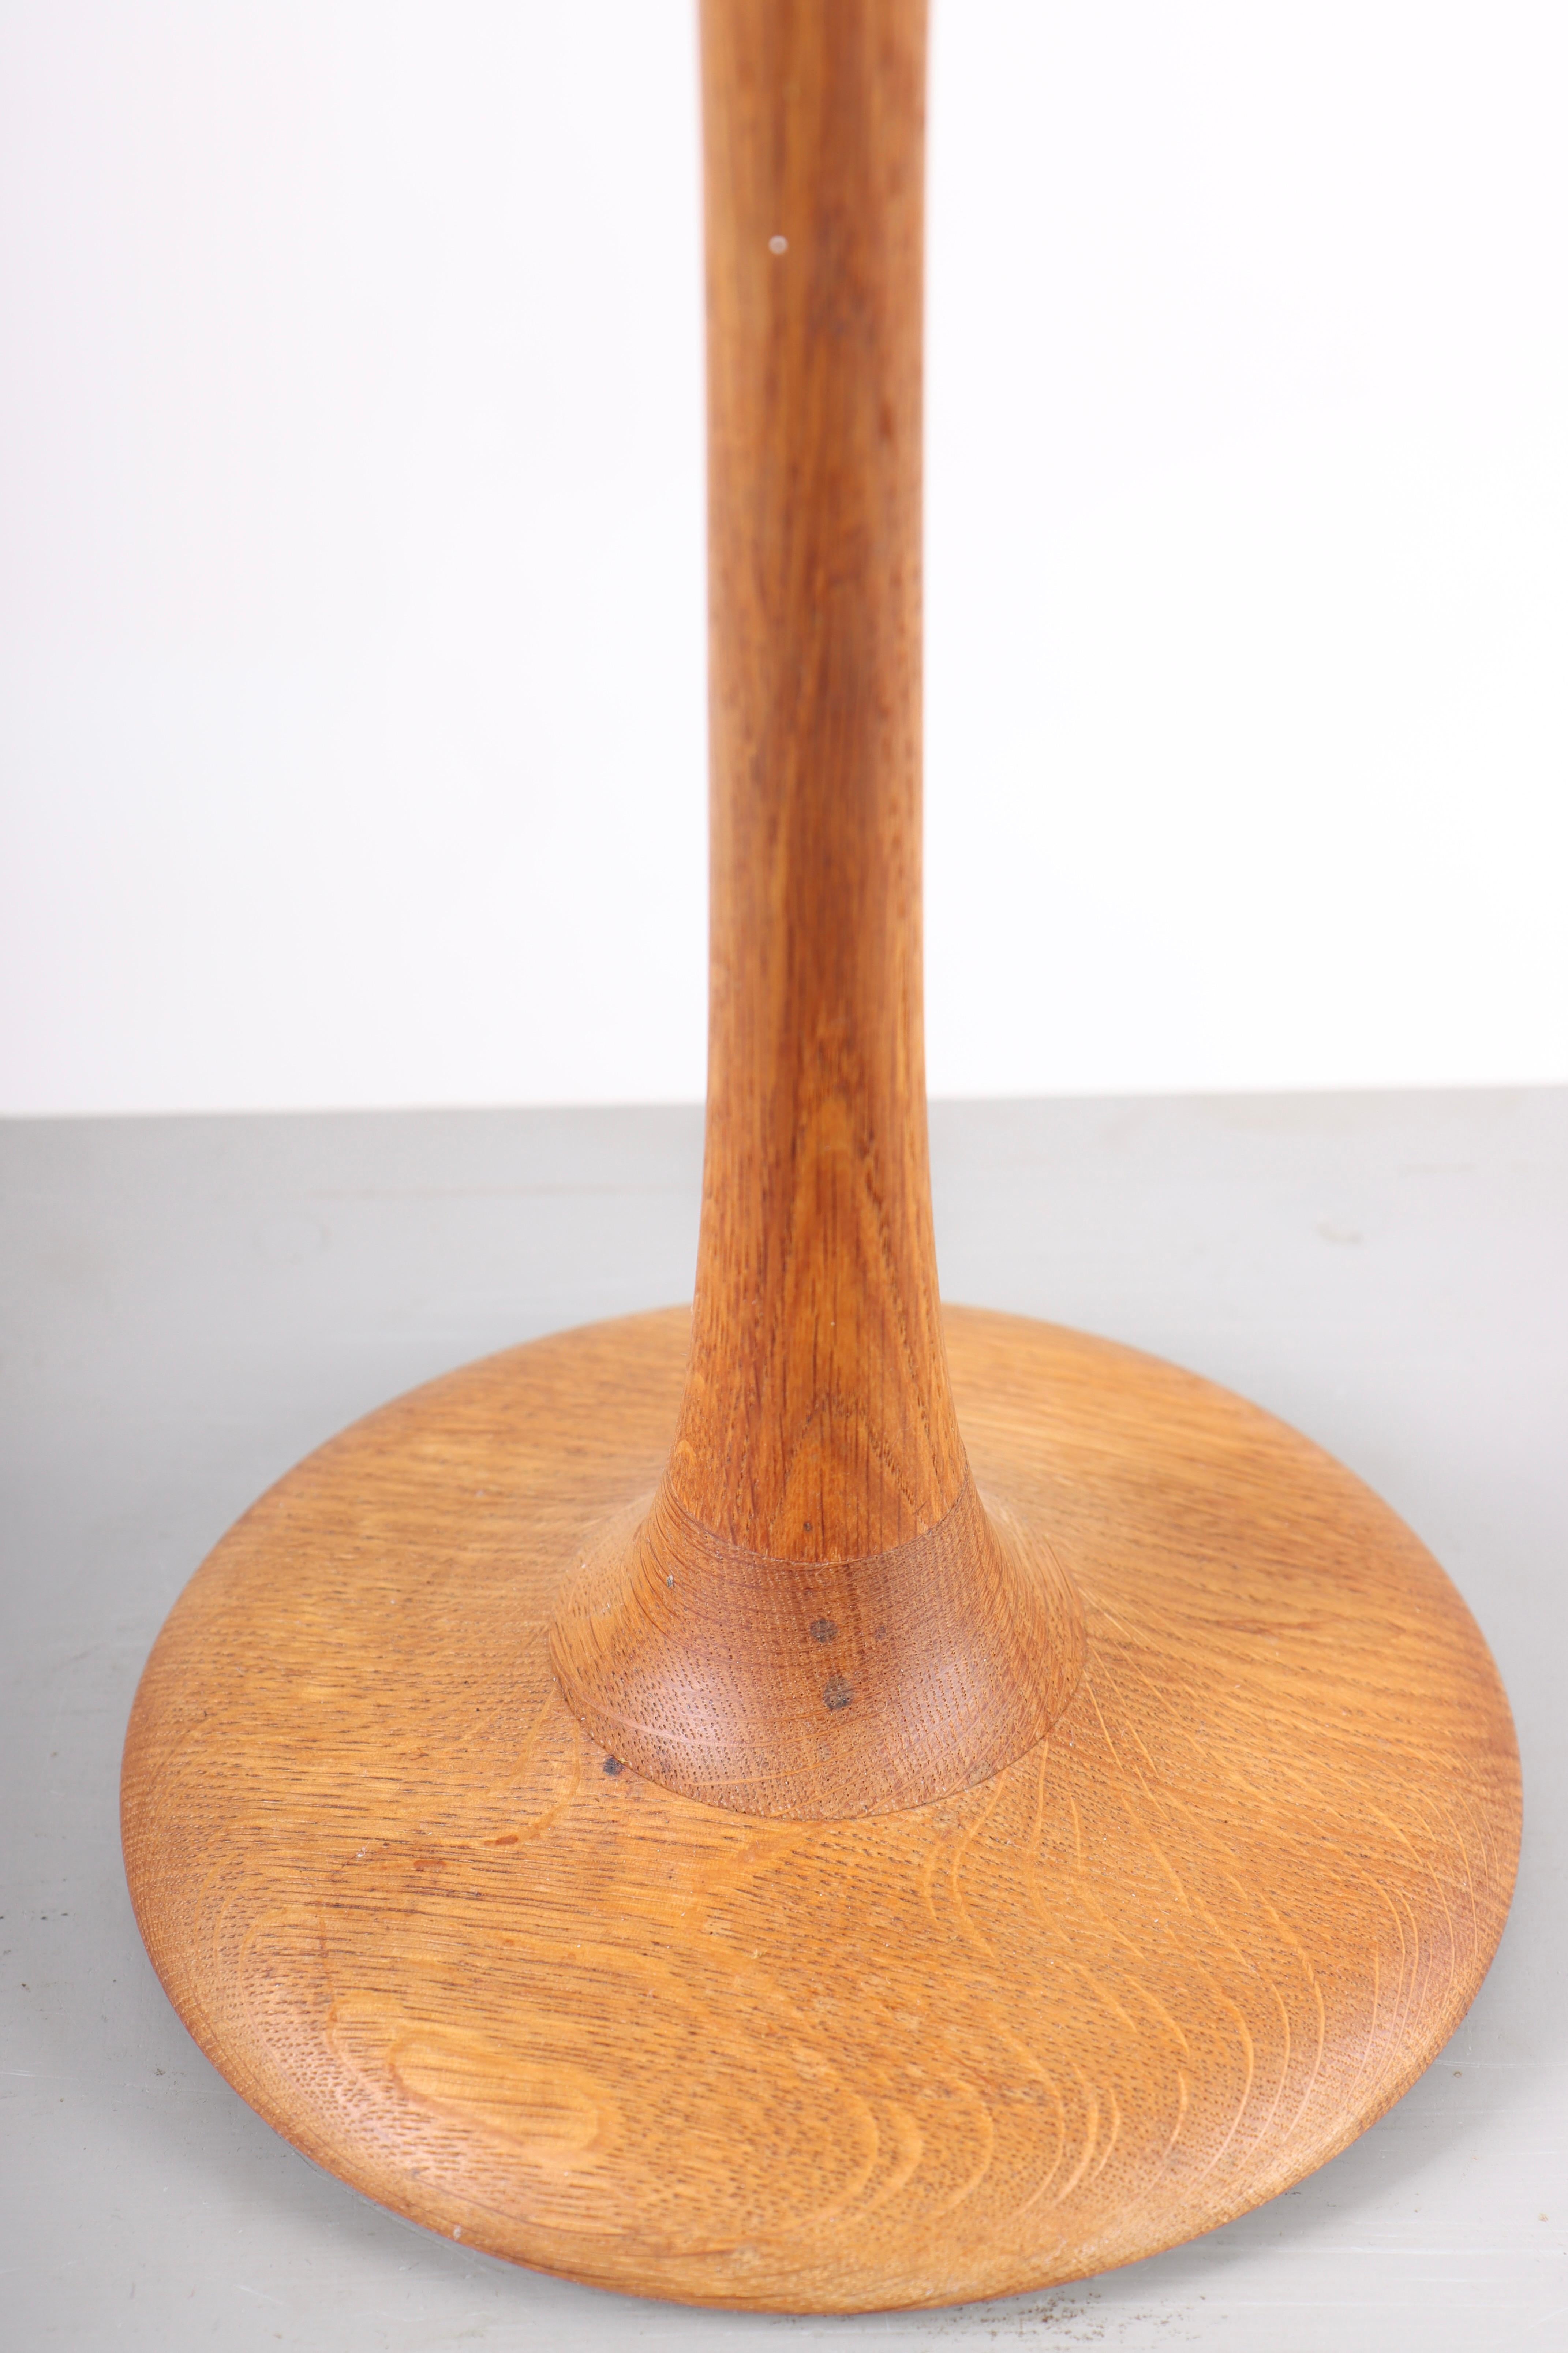 Table lamp in solid oak, designed and made in Denmark 1960s
The lamp has a very nice warm patina. Great original condition.